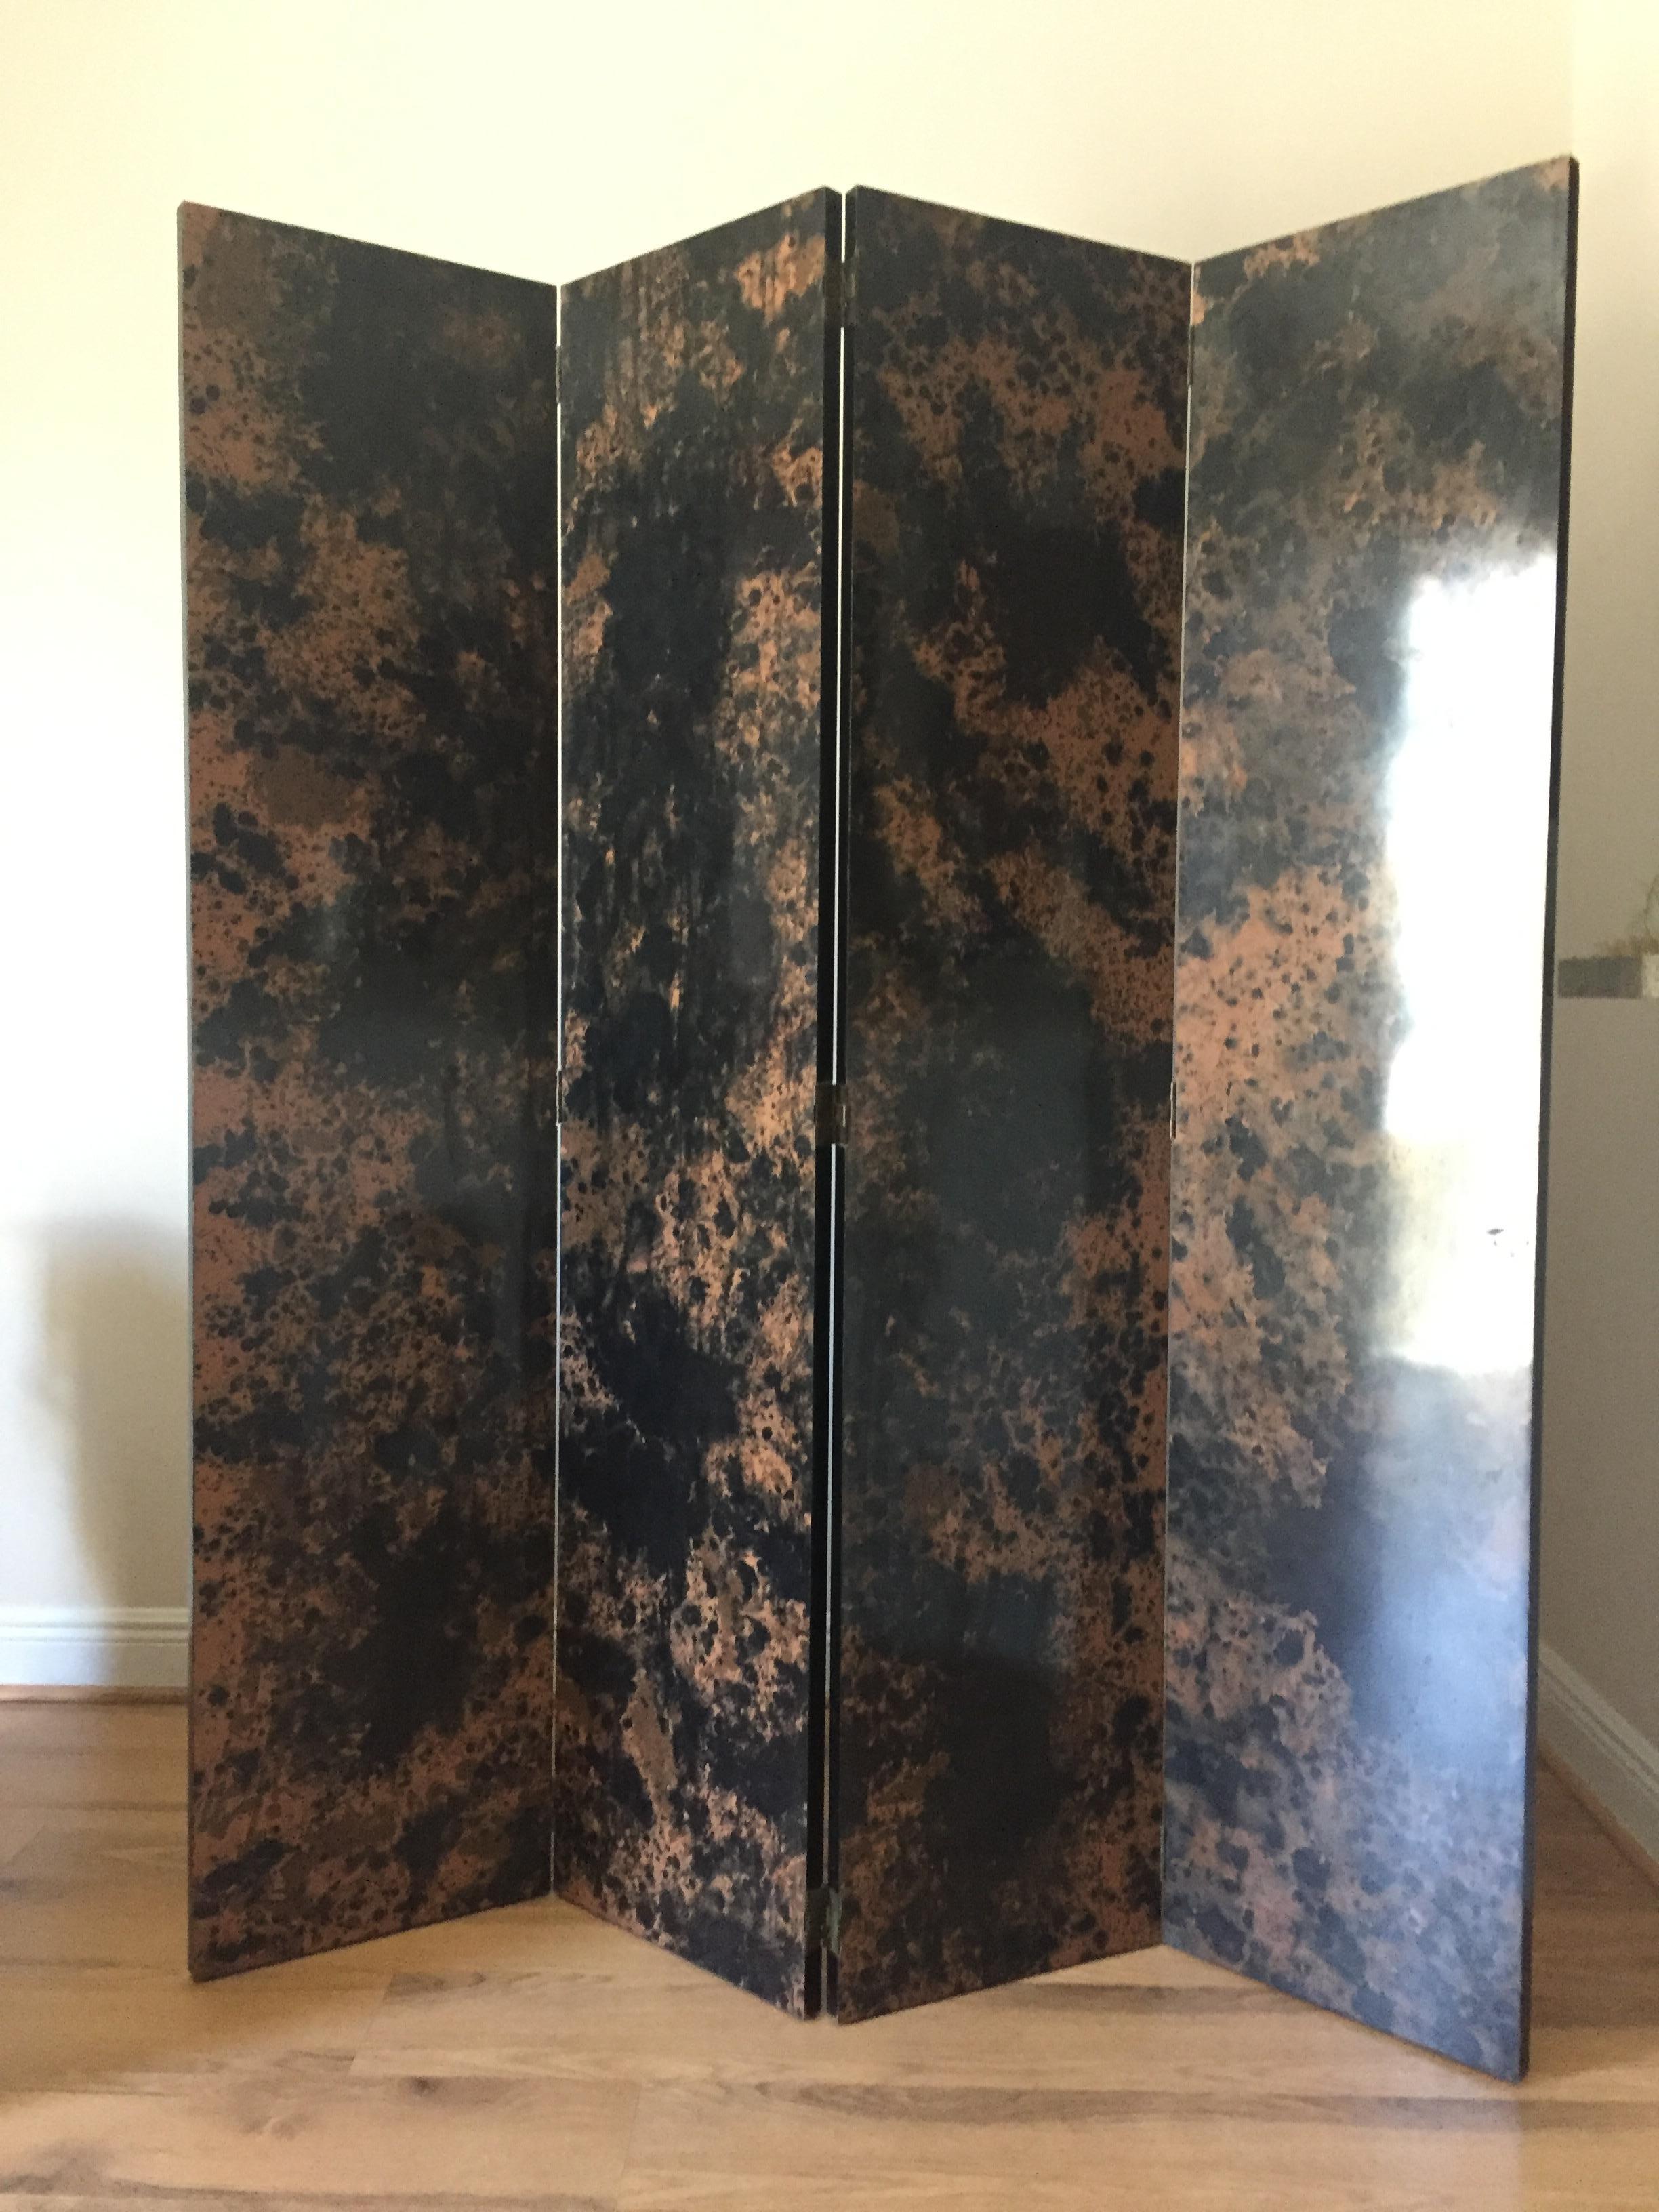 4 pcs folding lacquer marbelized screen room divider. Two sided.